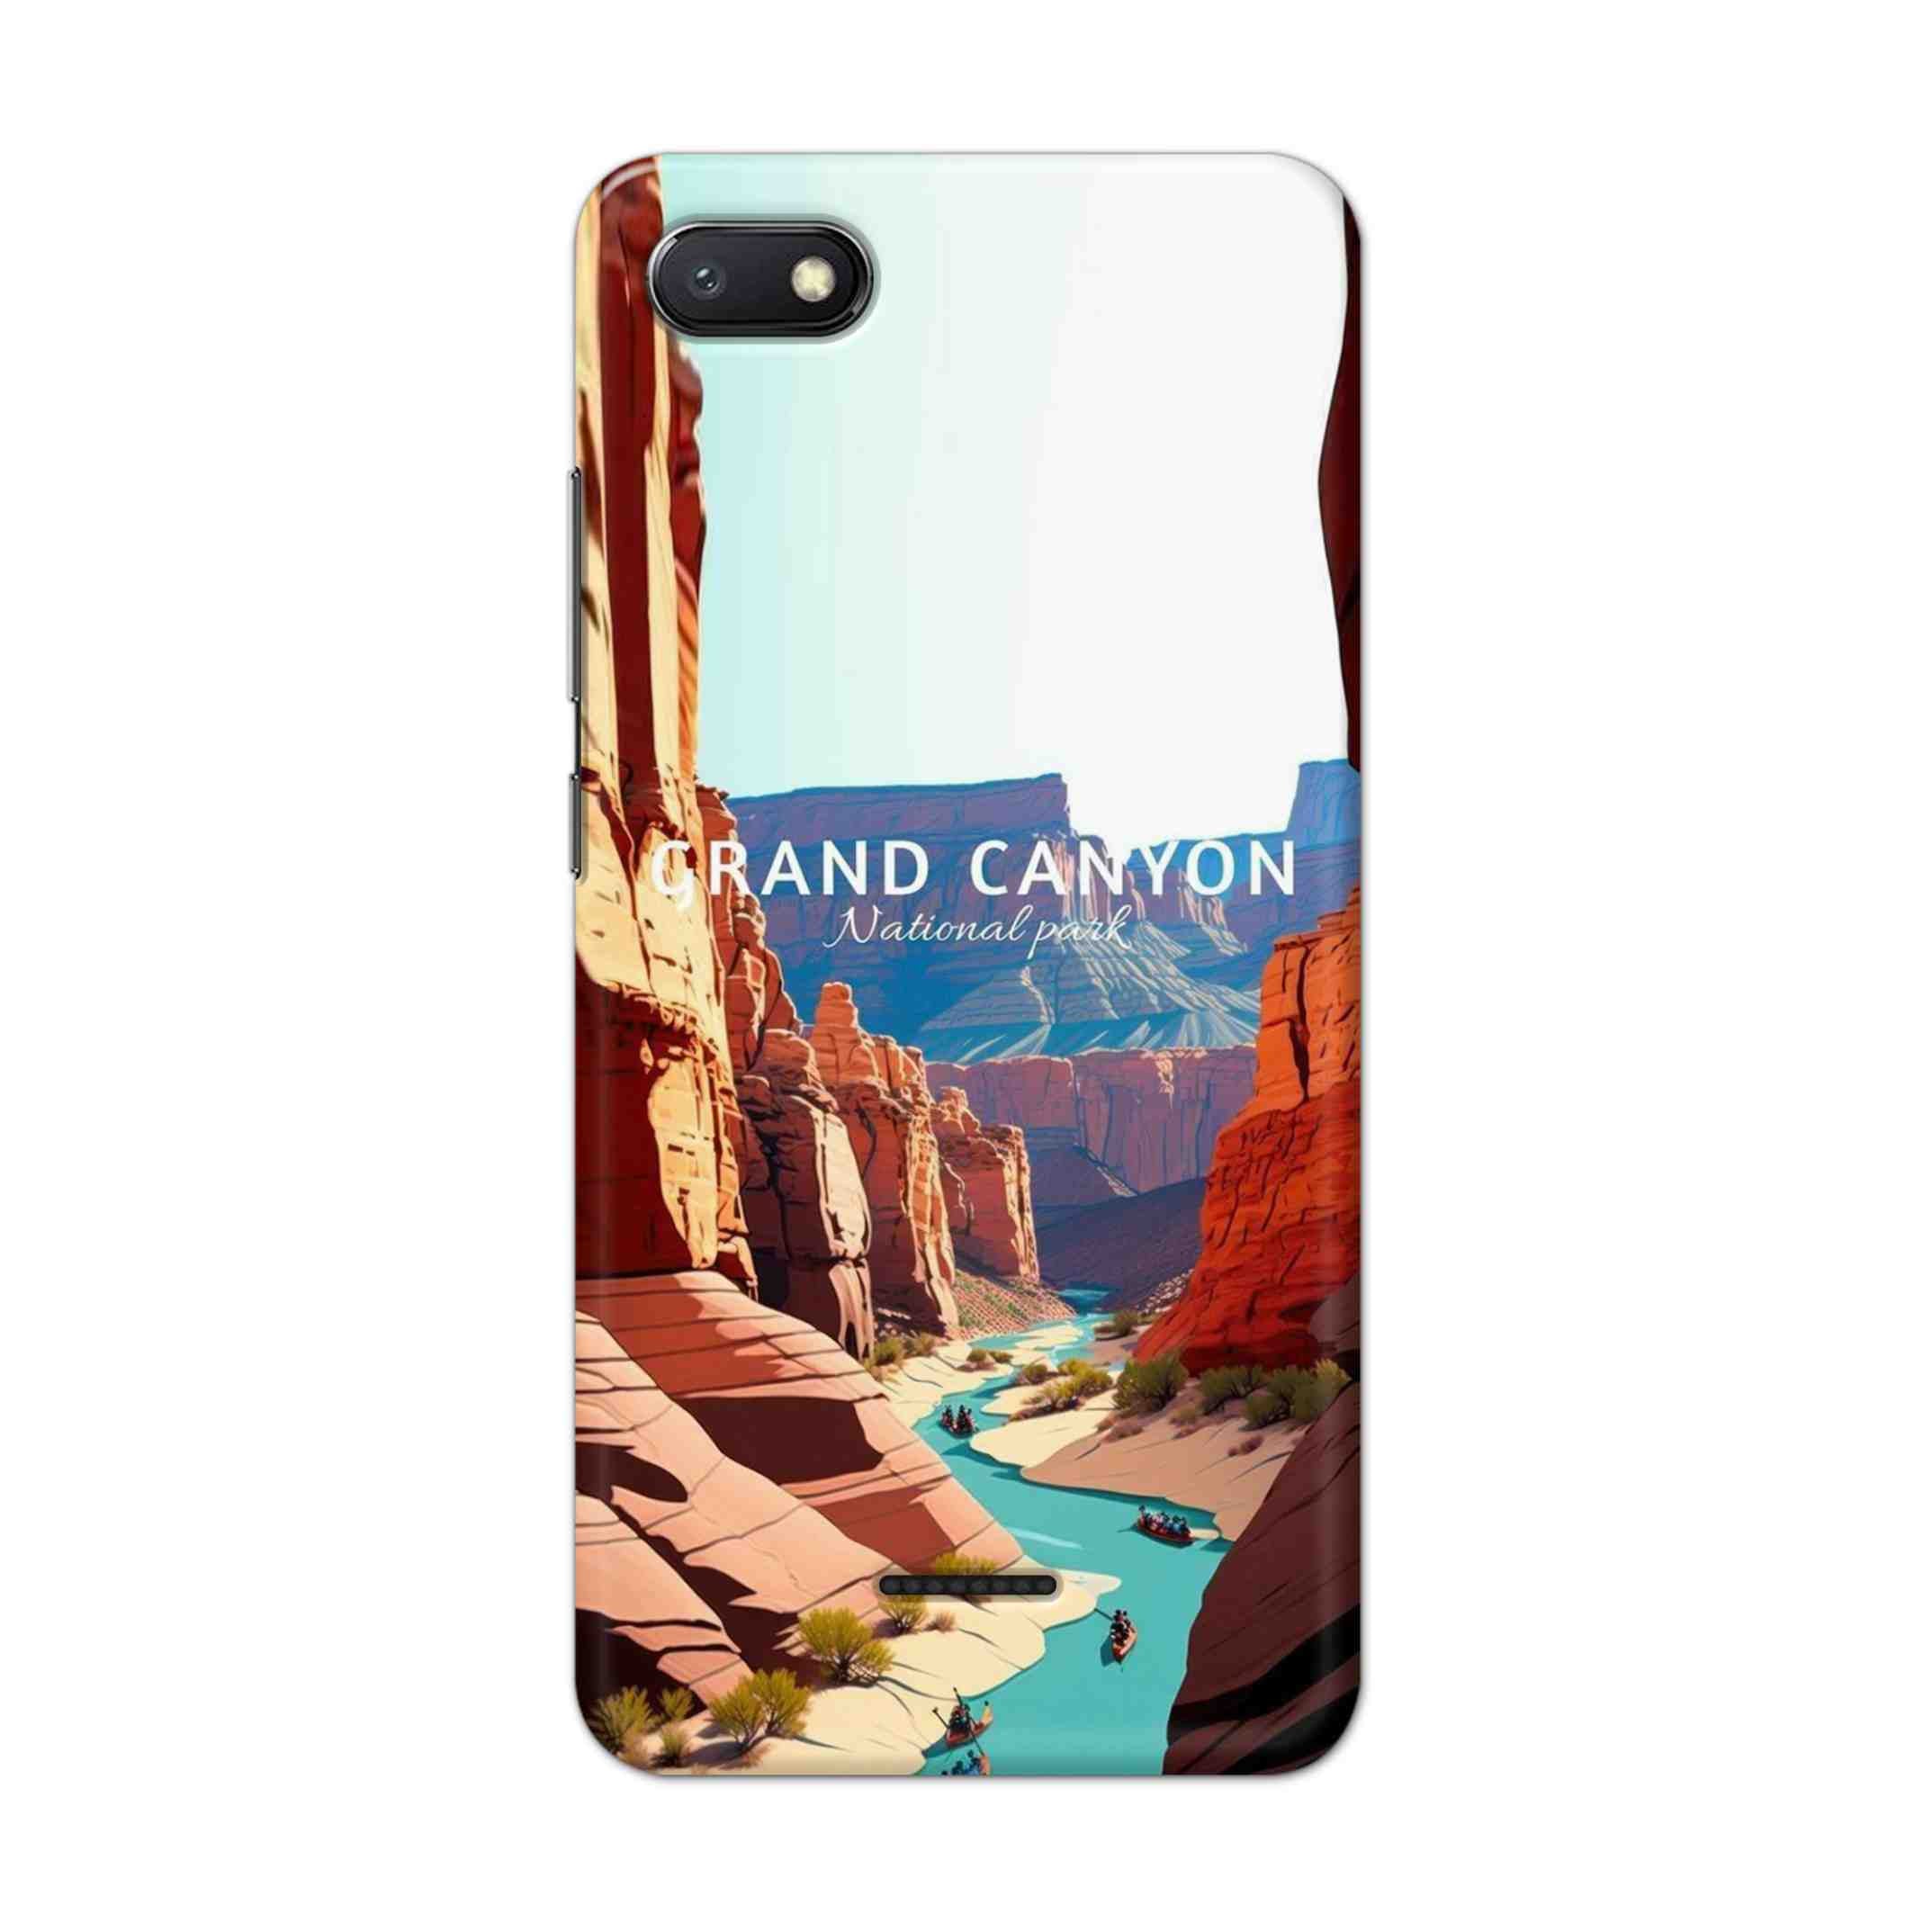 Buy Grand Canyan Hard Back Mobile Phone Case/Cover For Xiaomi Redmi 6A Online